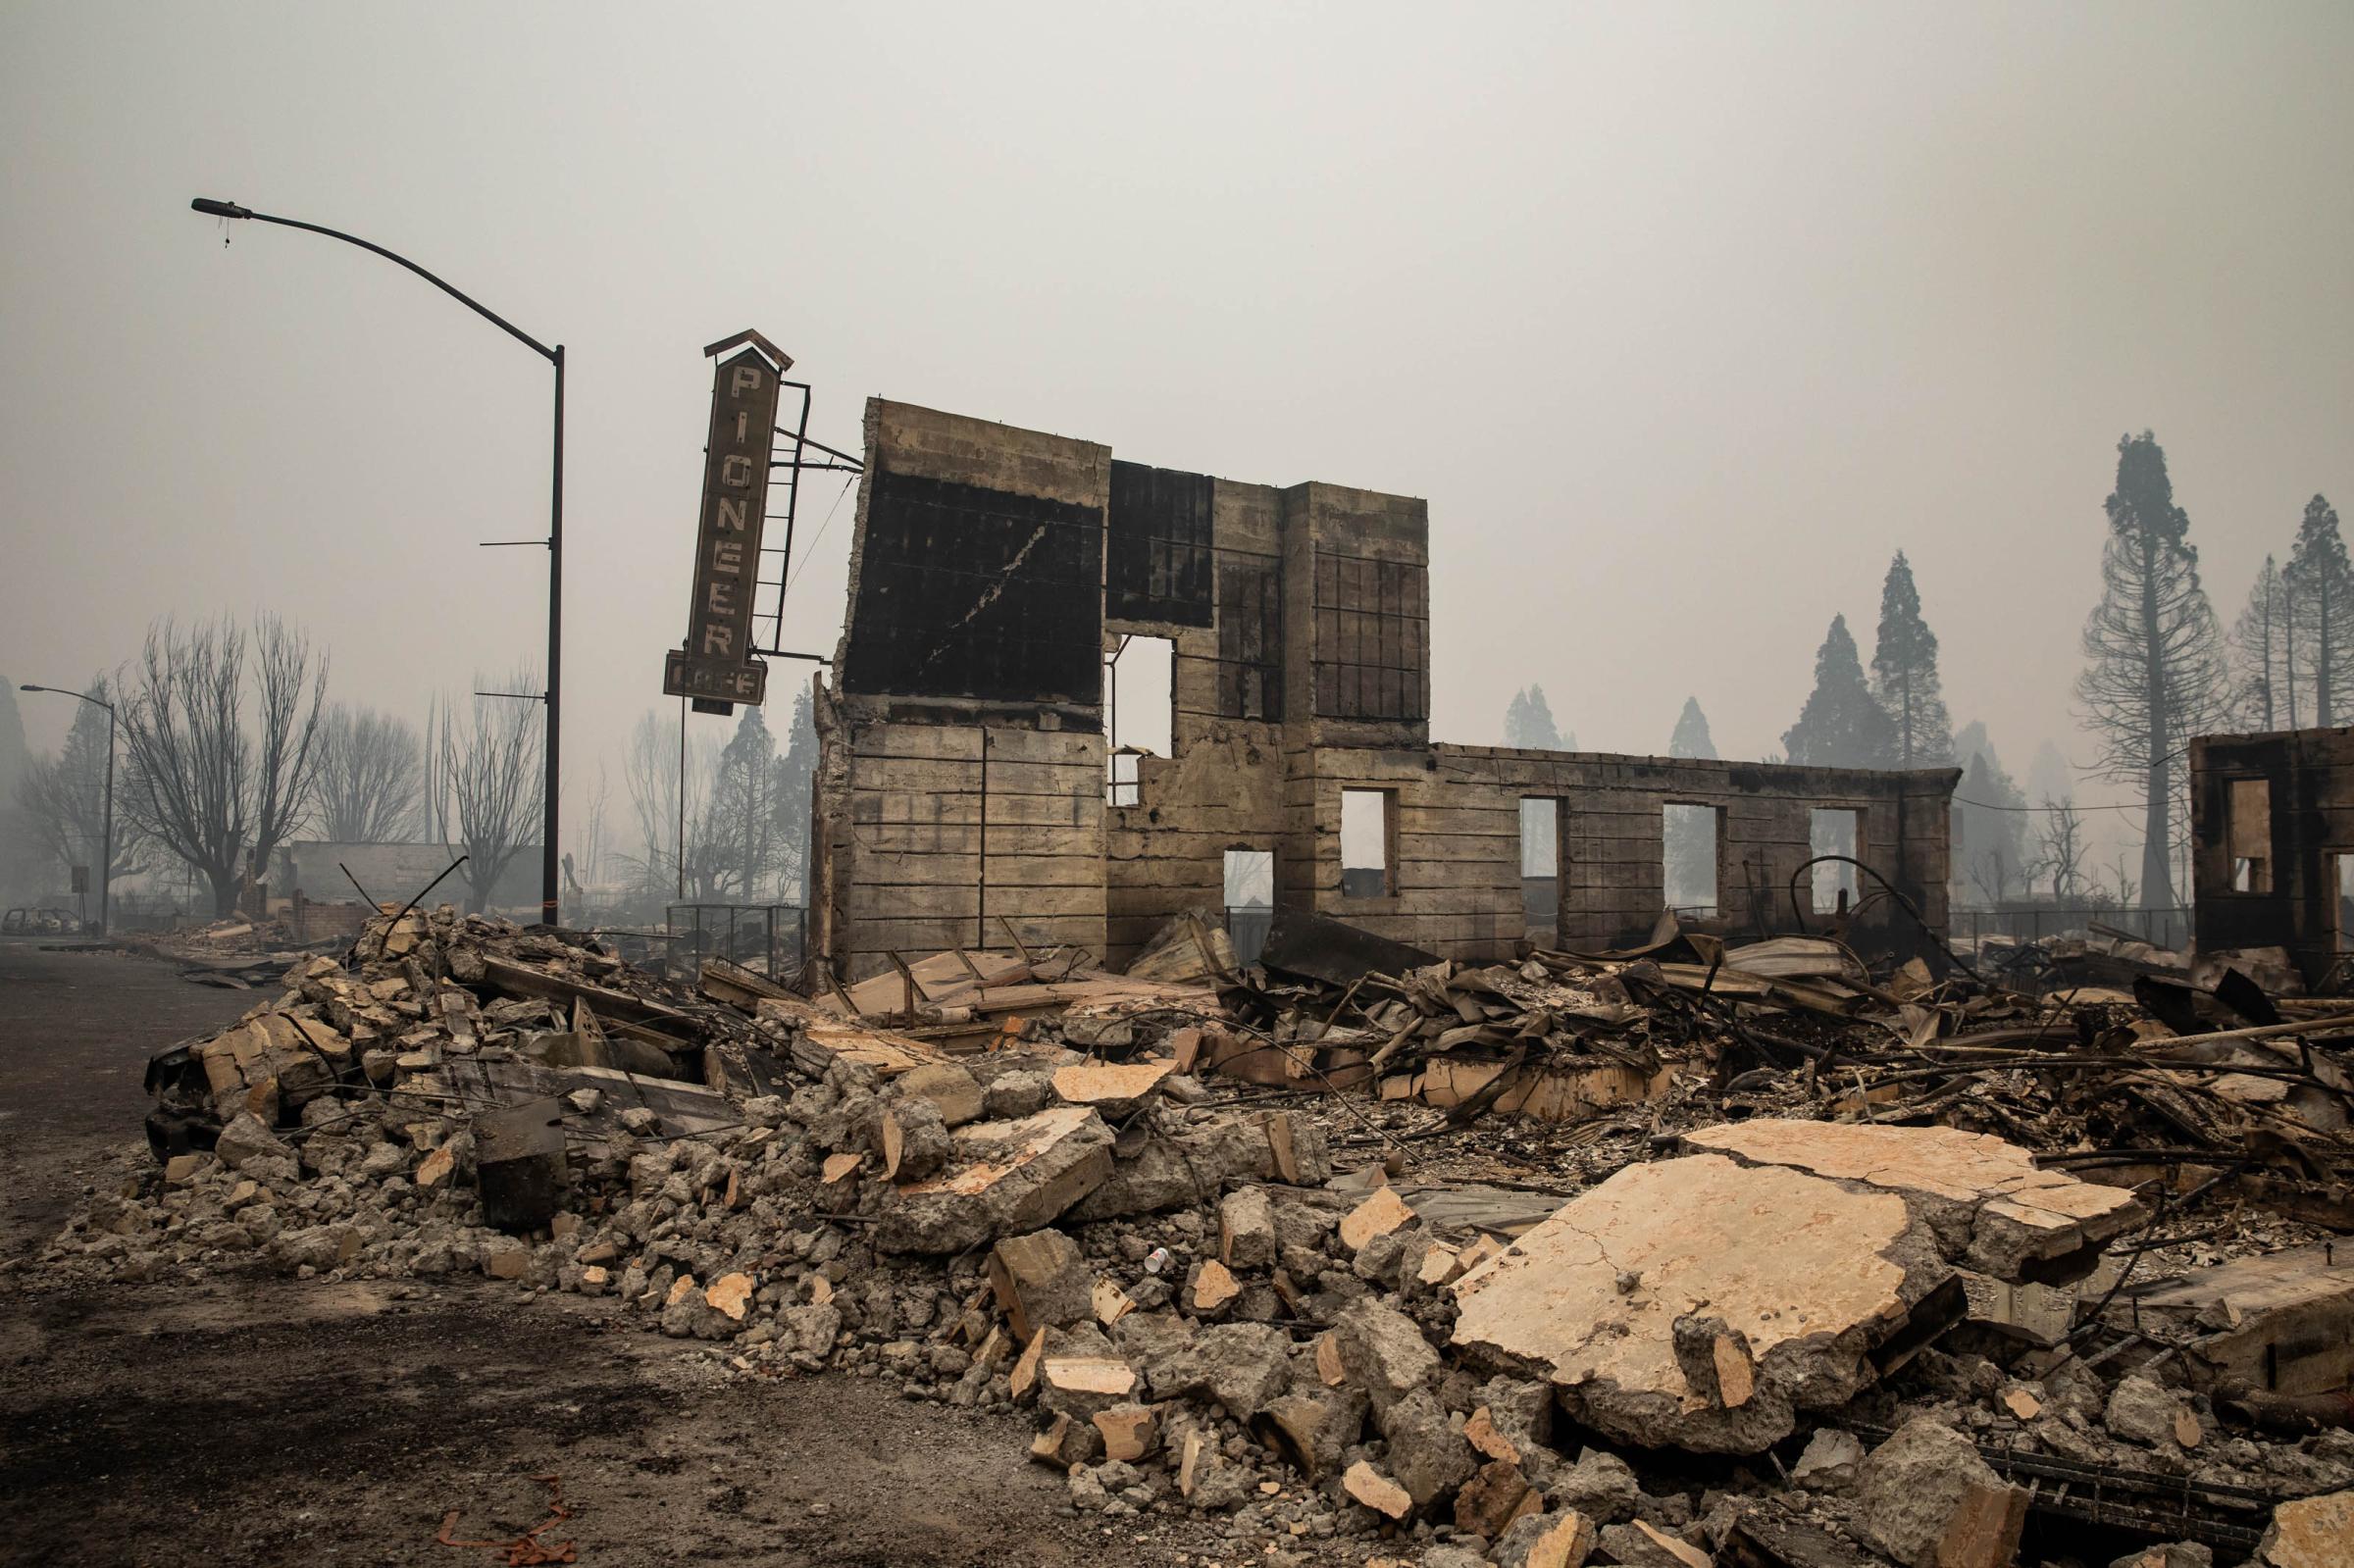 2021 in pictures - On August 4, 2021 the Dixie Fire destroyed much of Greenville, California; over 100 homes and...